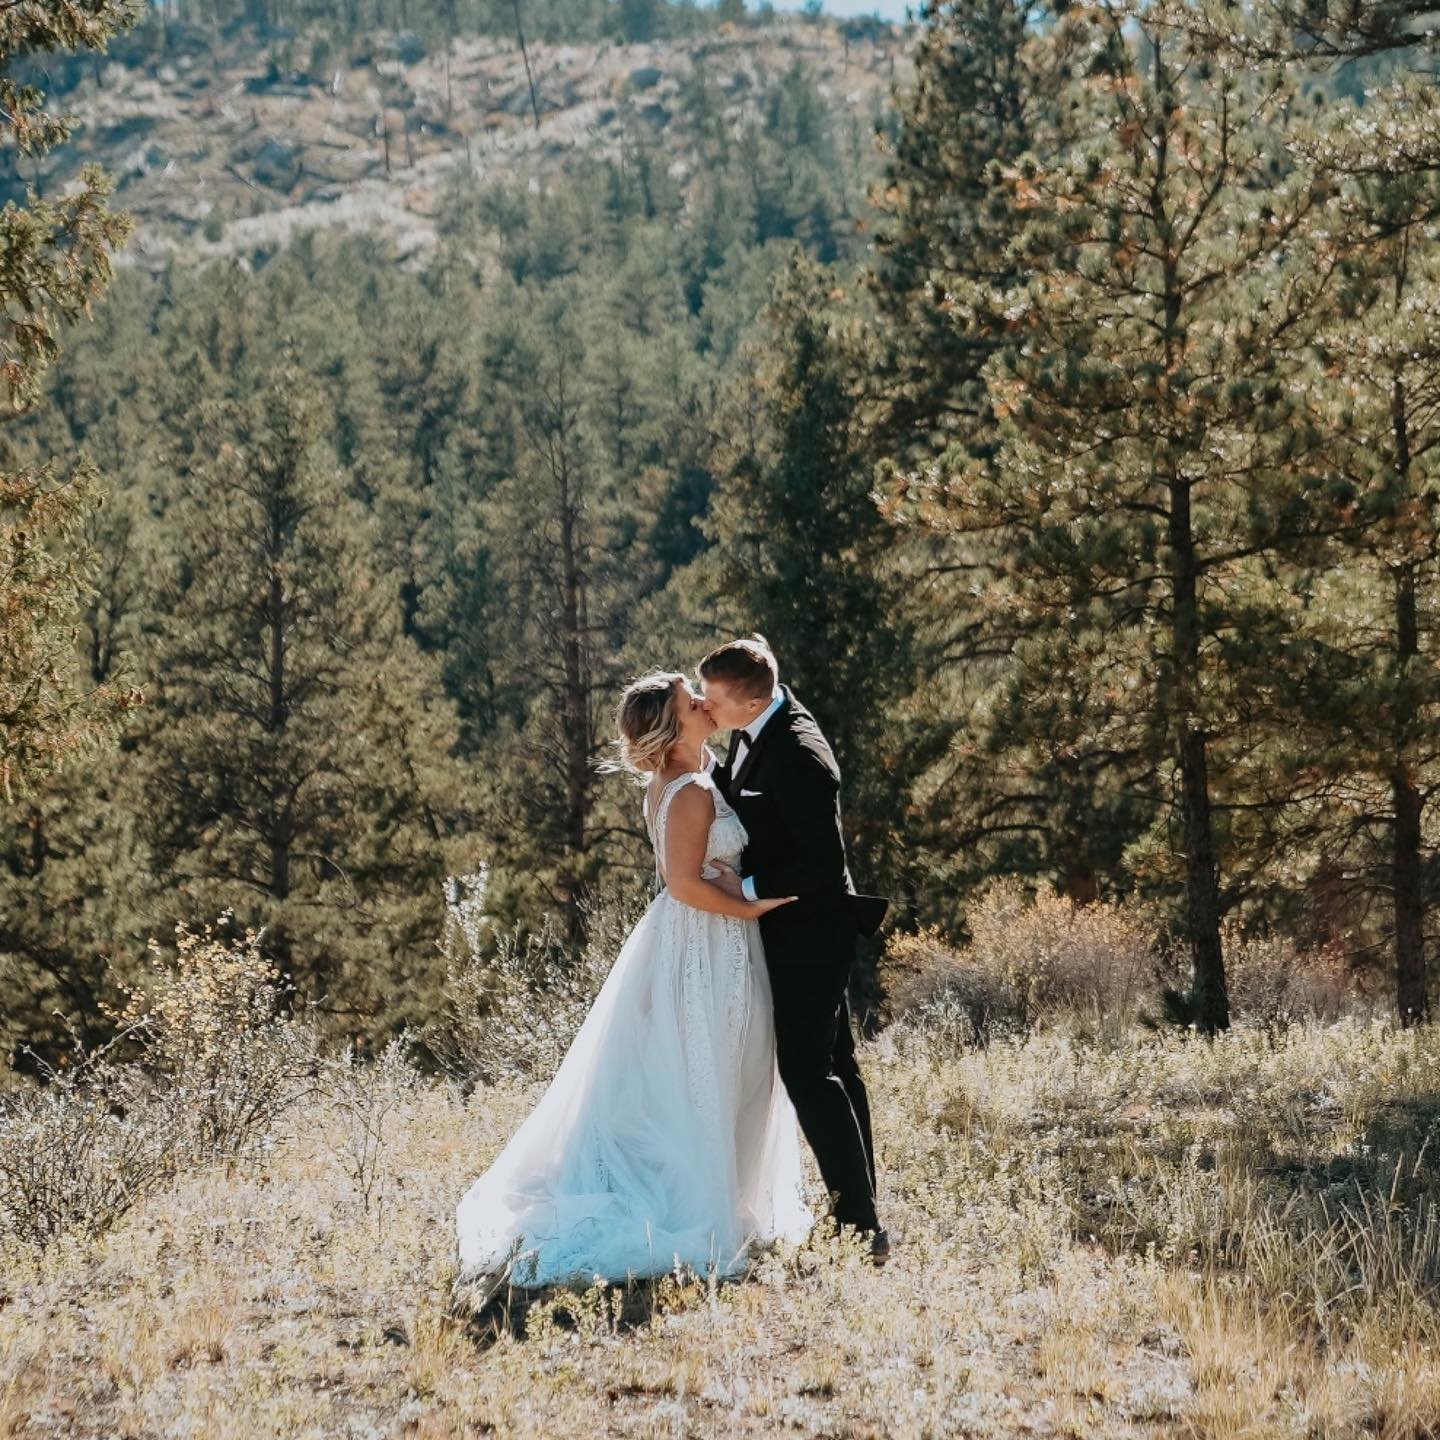 A first look can be such an intimate and beautiful moment between a couple. It&rsquo;s one of my favorite parts of any elopement or wedding 🤍
.
.
.

.
.
.
#coloradoweddingphotographer #coloradobridetobe #coloradoelopementphotographer #coloradoelopem